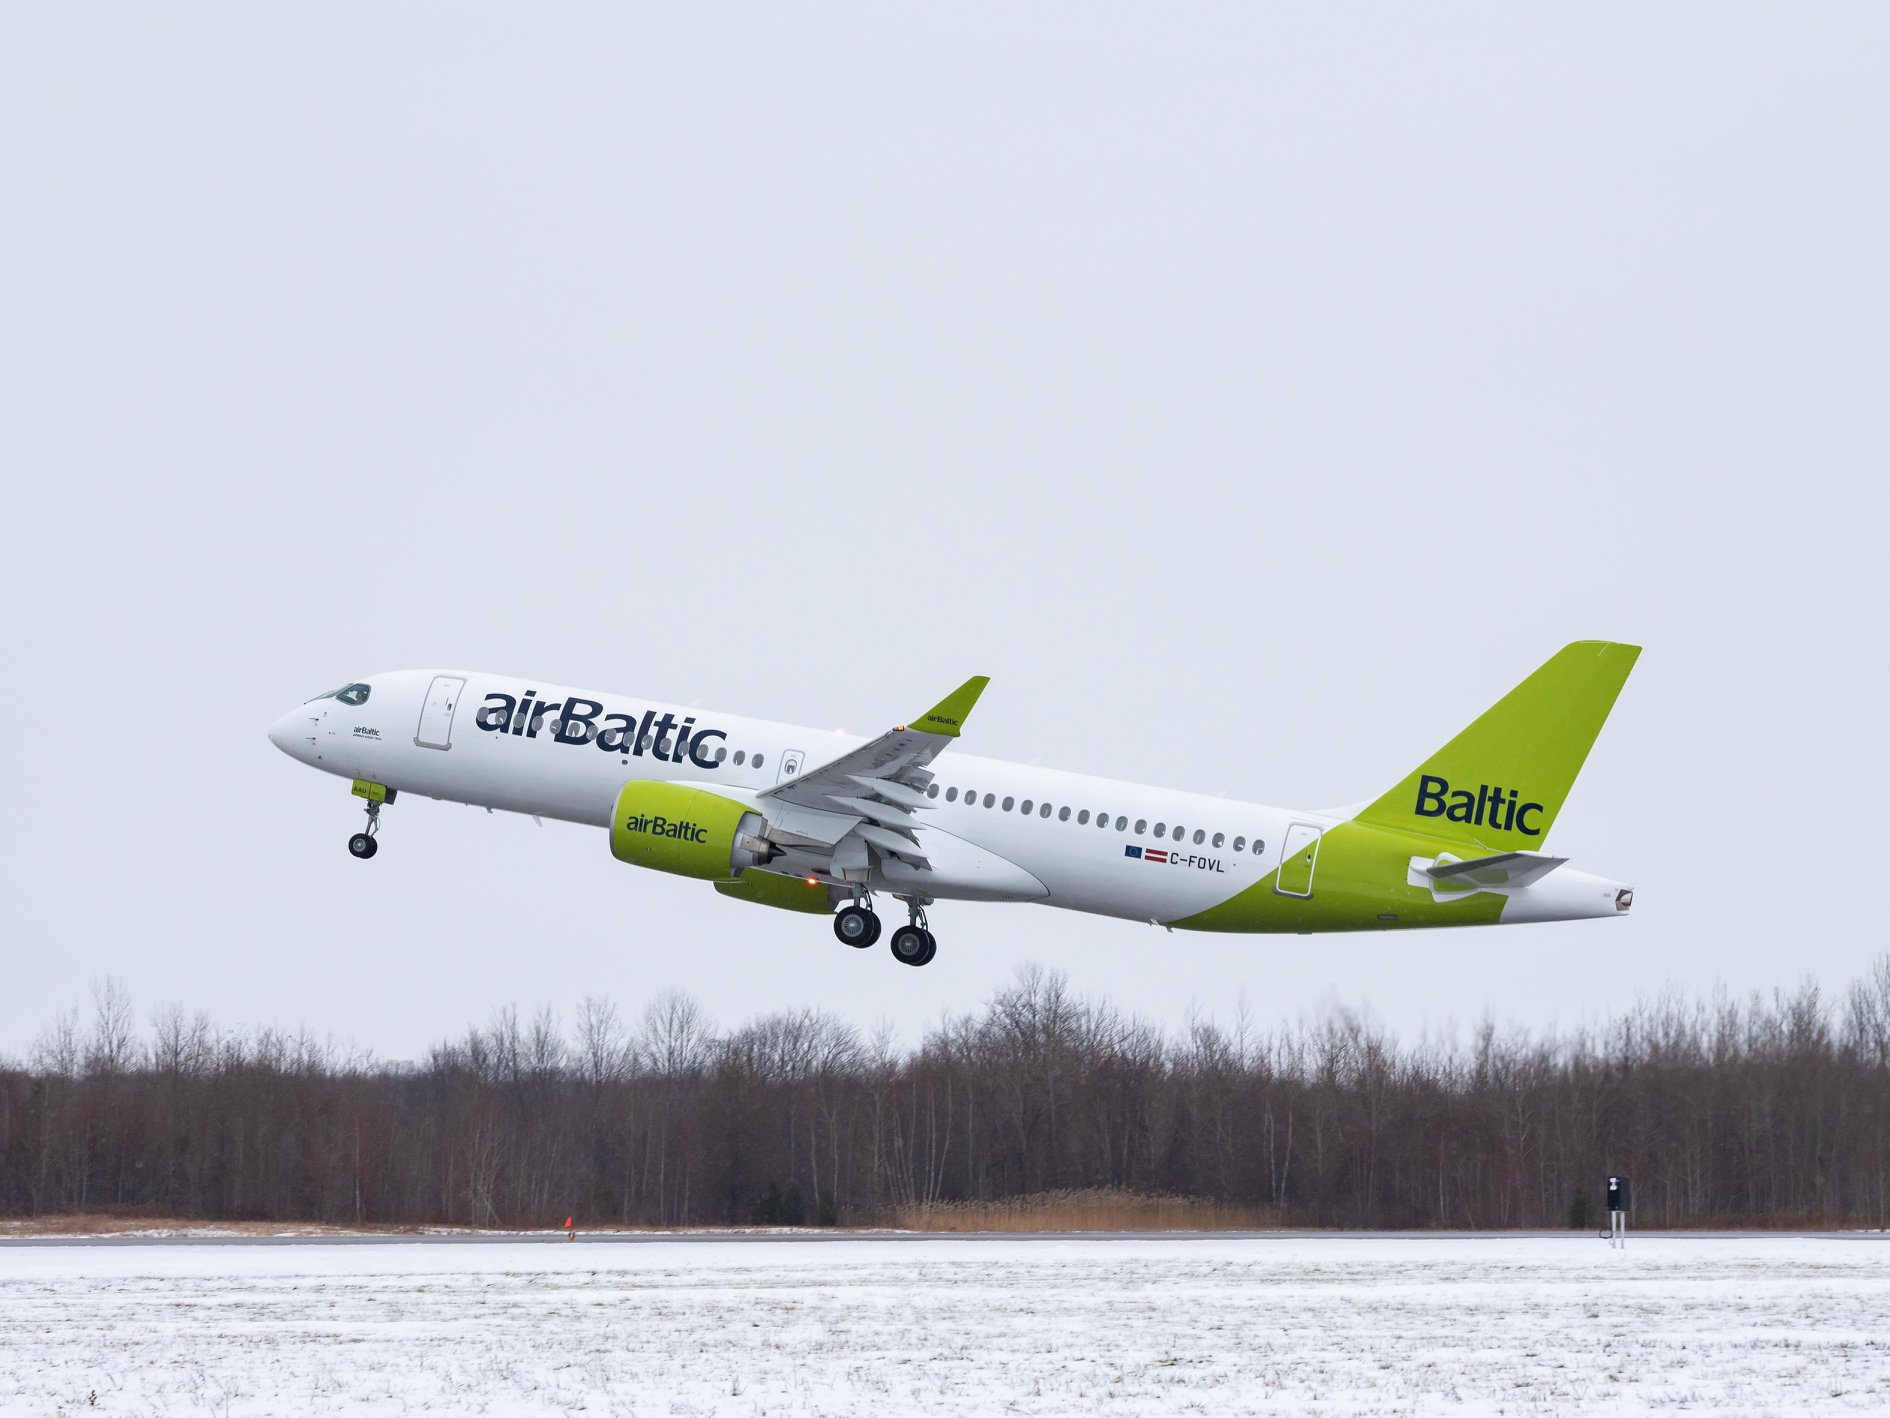 ParkVia secures hat-trick of contract renewals with airBaltic